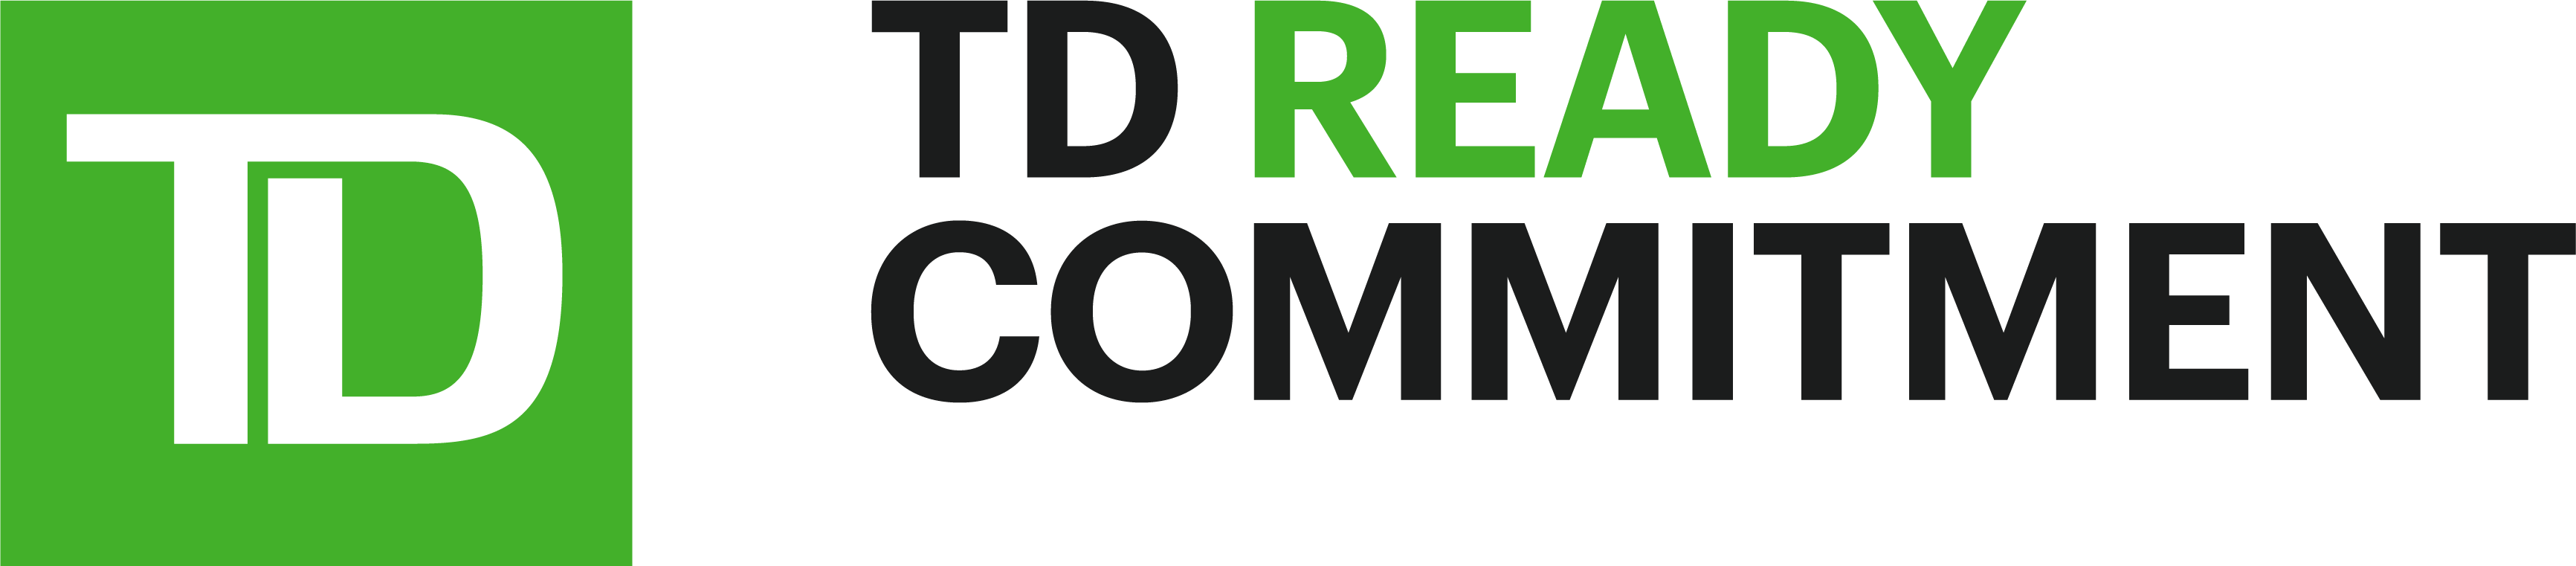 Logo of TD Ready Commitment, featuring the letters 'TD' in large white font against a vibrant green square. Next to this, 'READY COMMITMENT' is written in a bold, capitalized, sans-serif font, with 'READY' in green and 'COMMITMENT' in black.